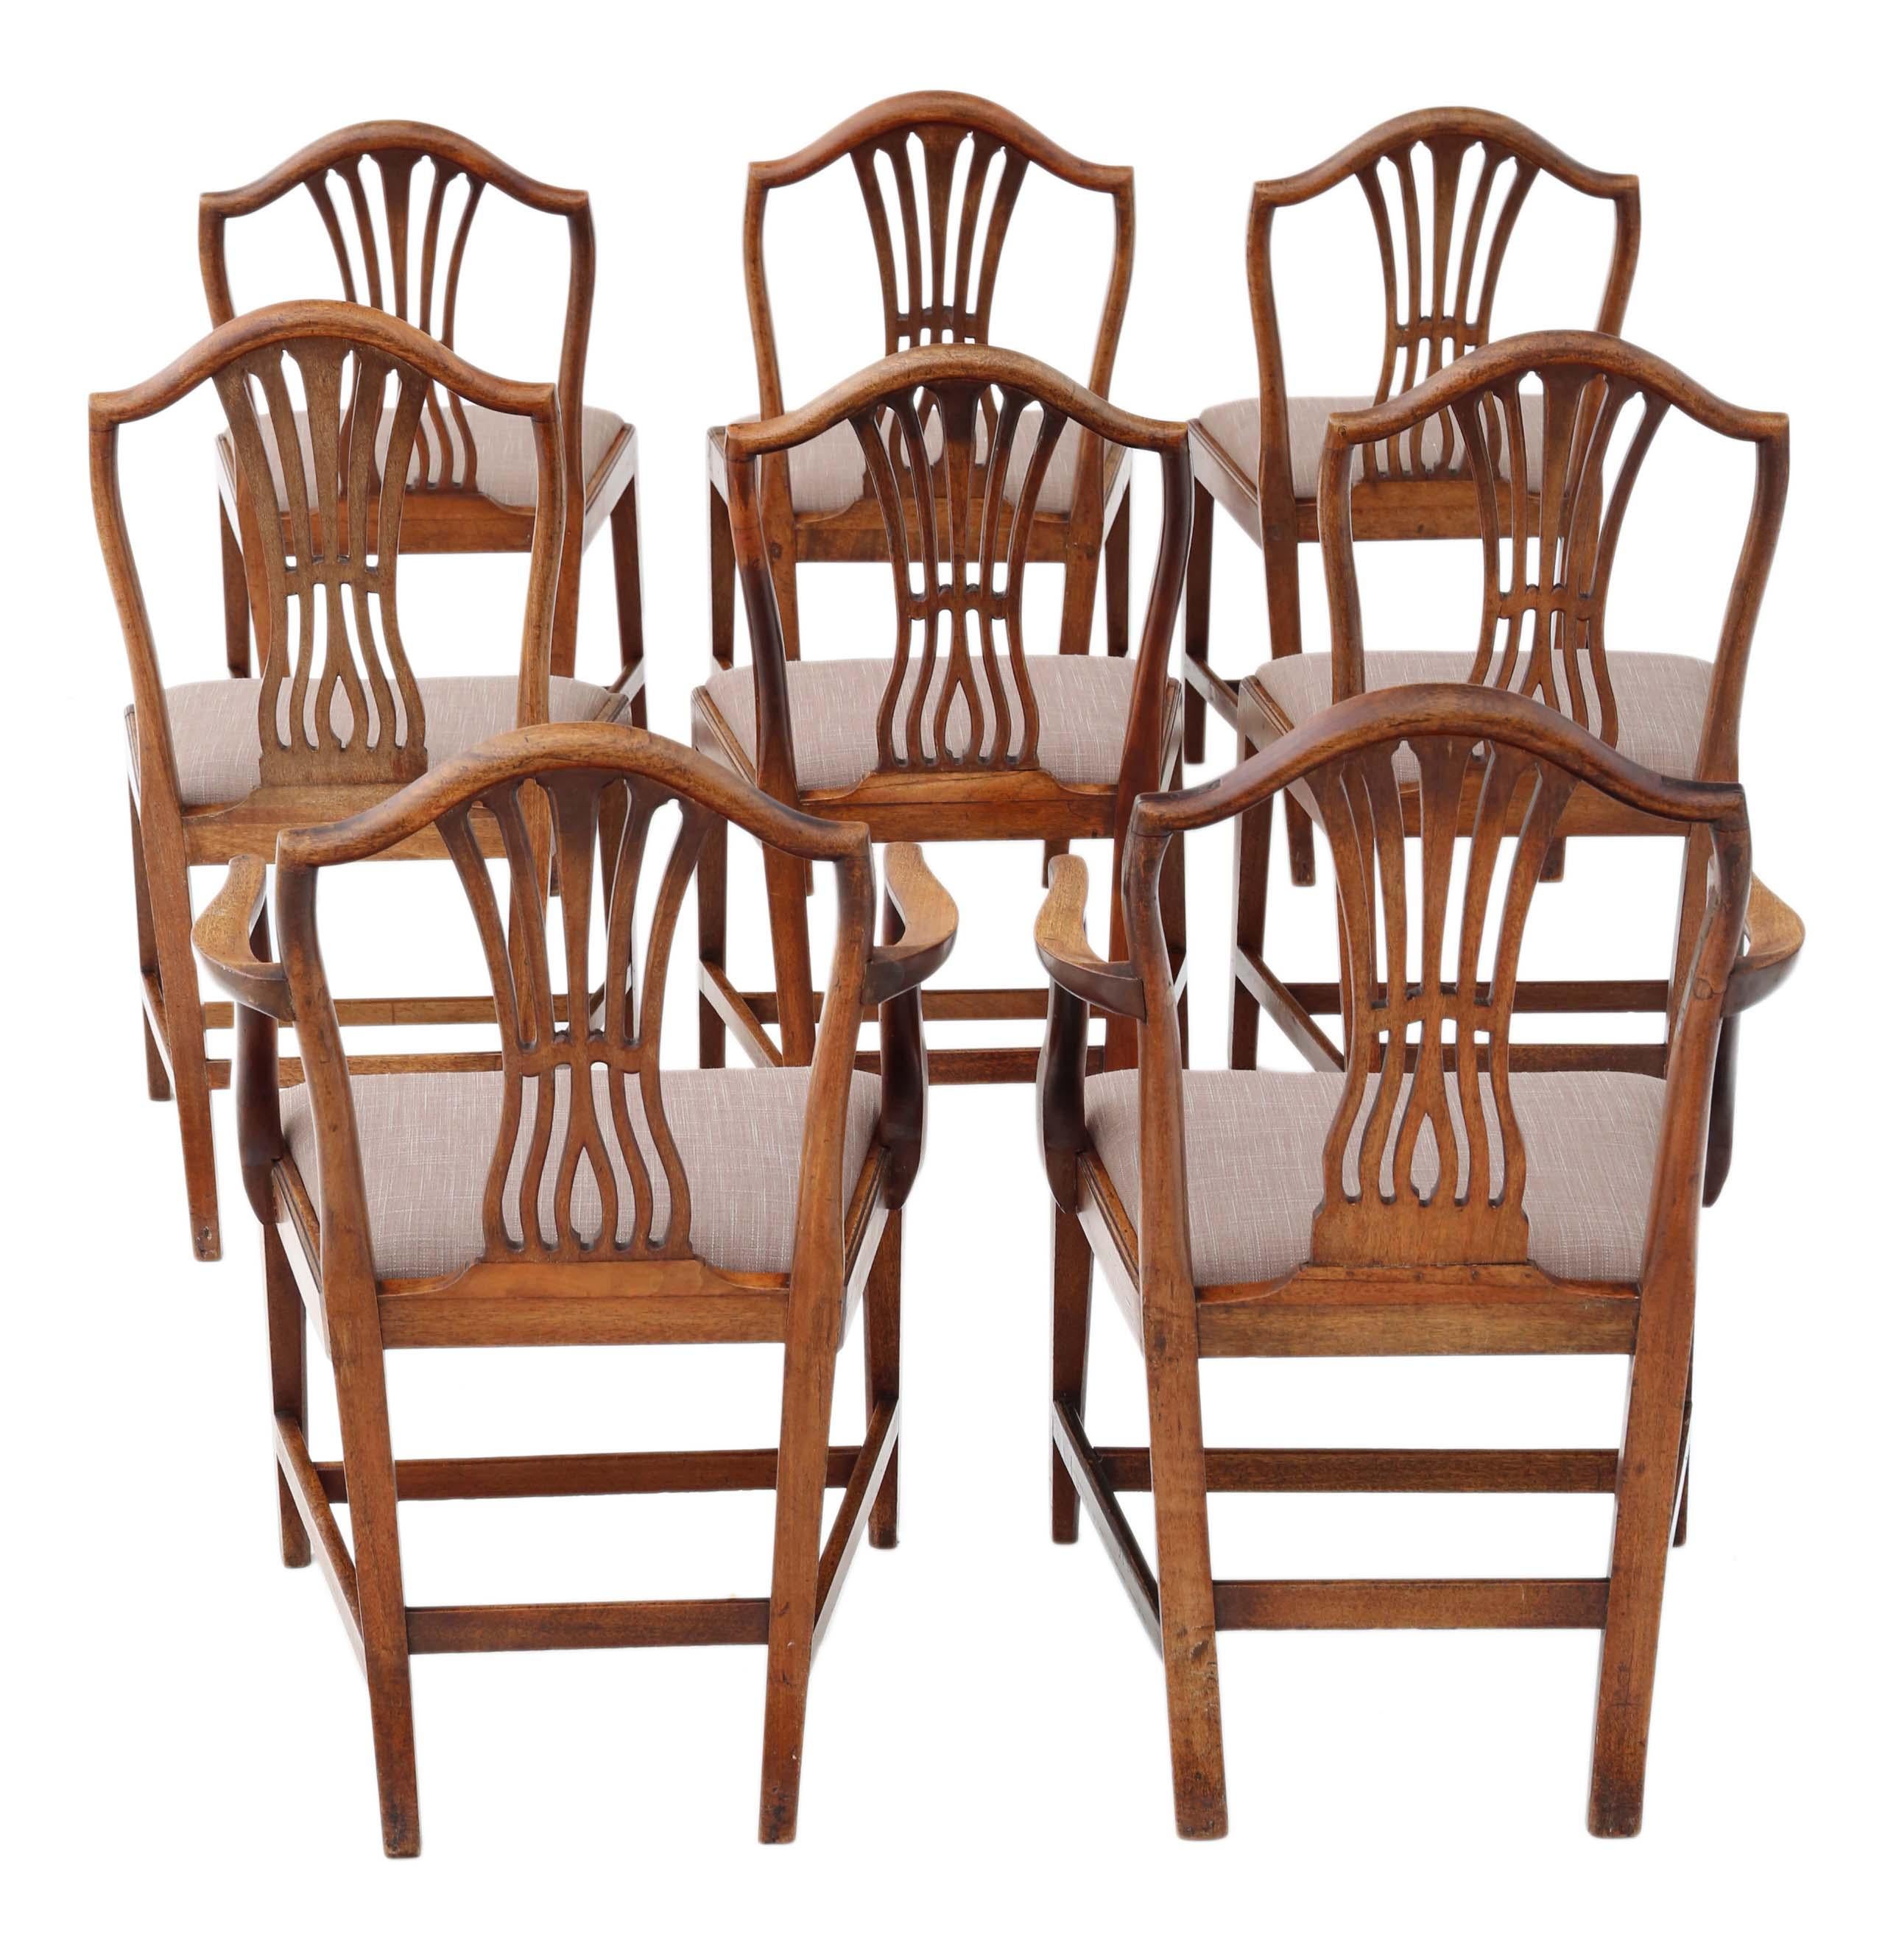 Antique quality set of 8 (6+2) Georgian mahogany dining chairs, circa 1800.

Full of age, character and charm.

Solid with no loose joints. Lovely simple elegant design. No woodworm.

New upholstery in a heavy weight fabric.

Overall maximum